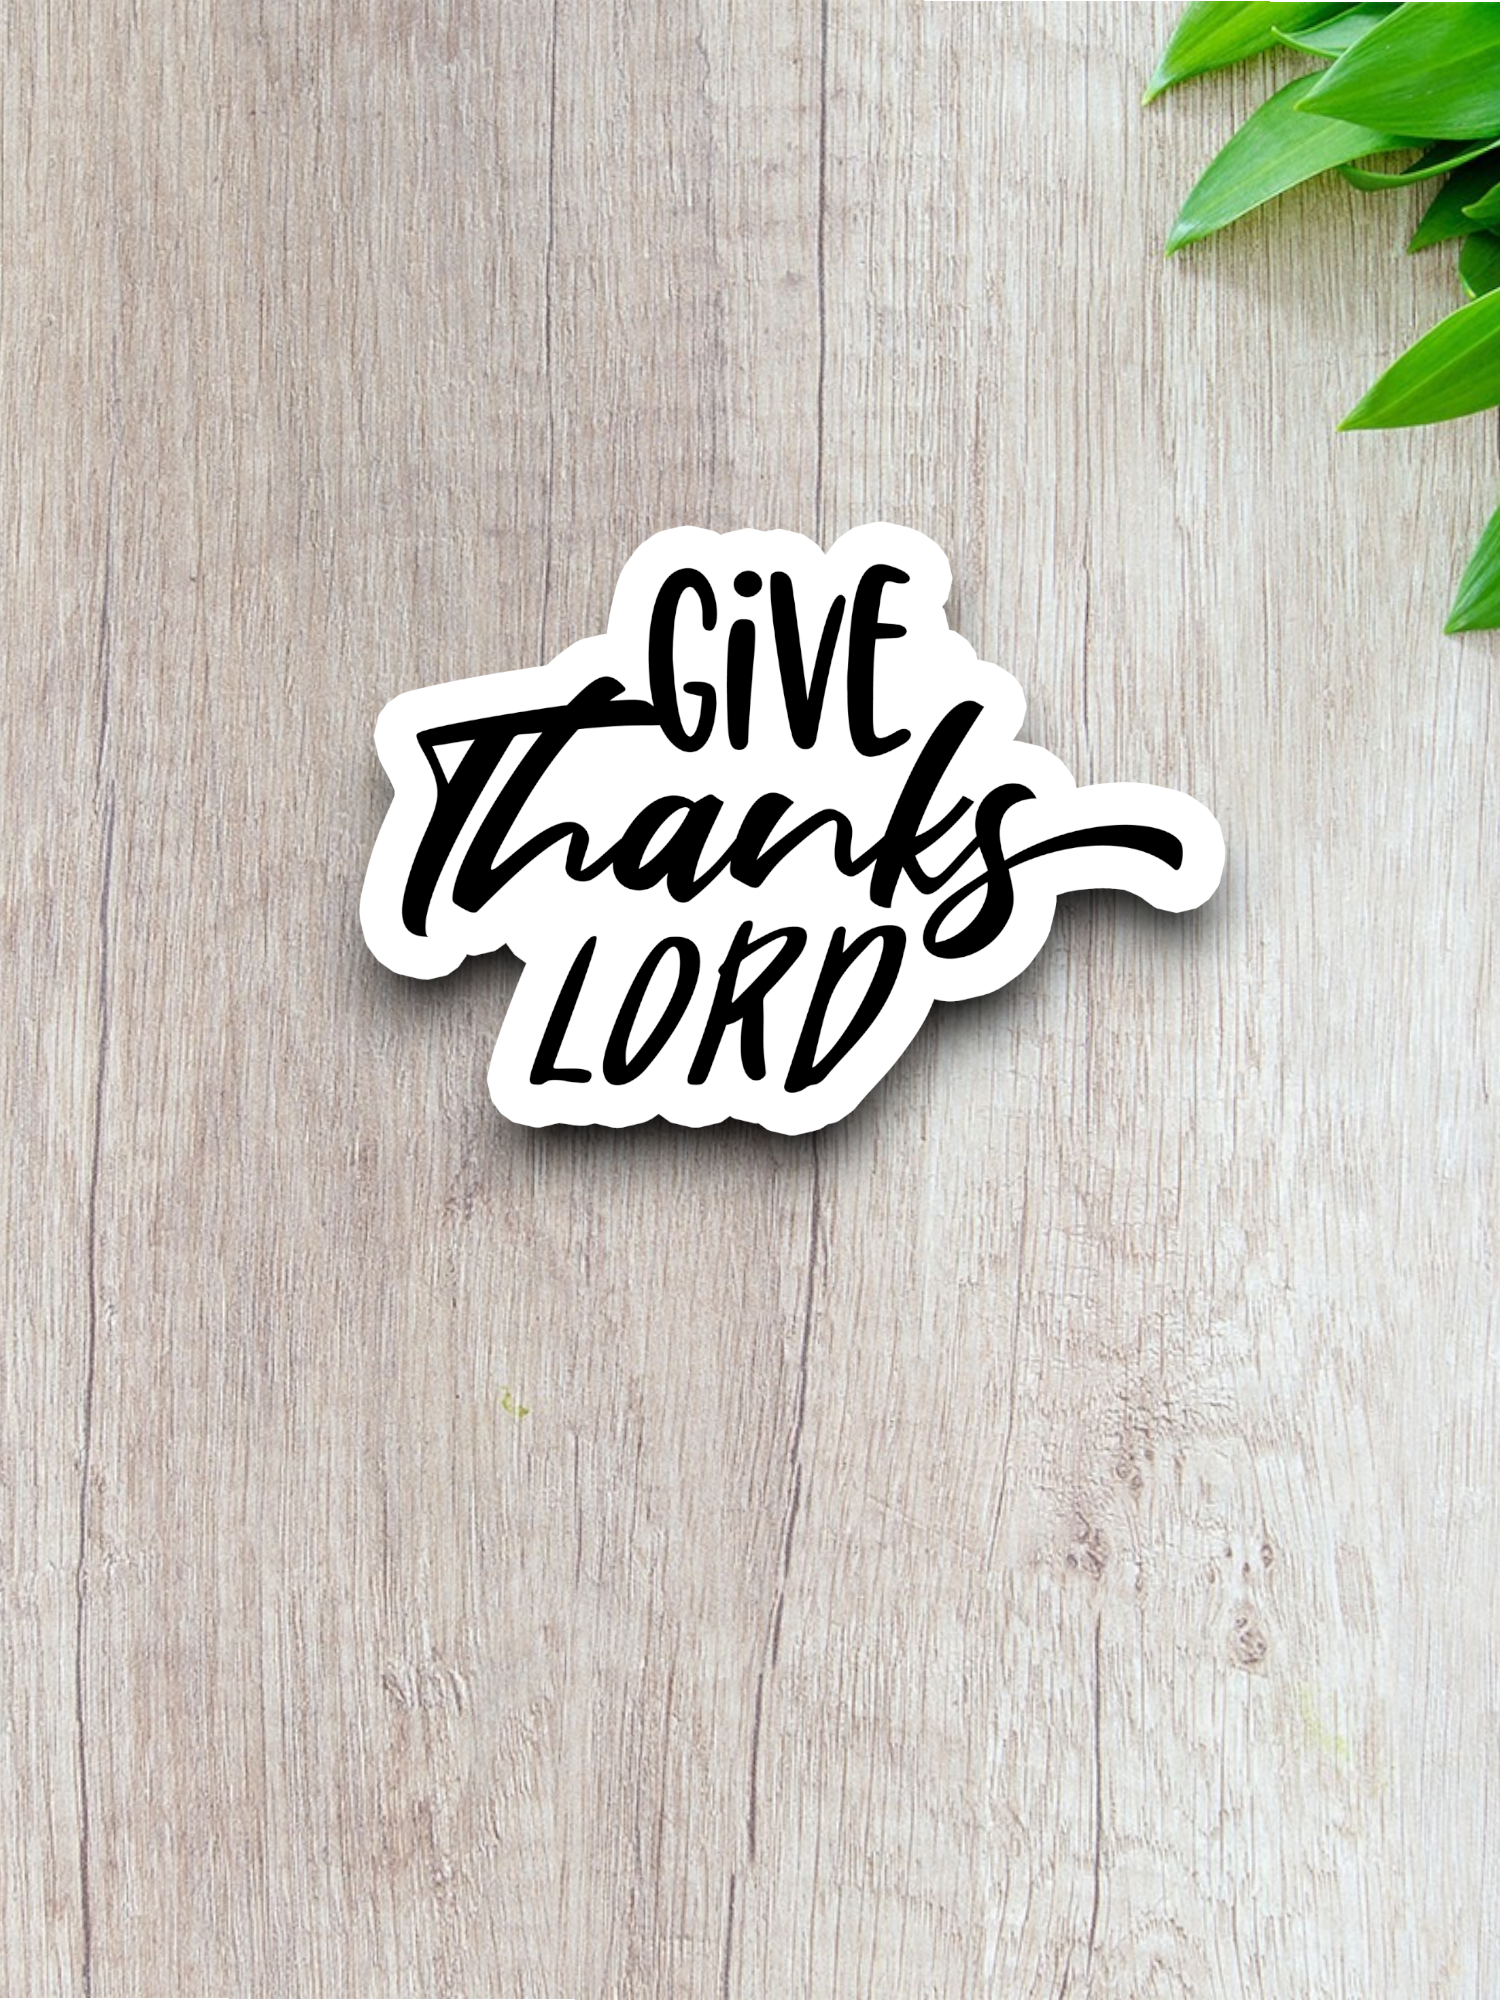 Give Thanks Lord - Faith Sticker